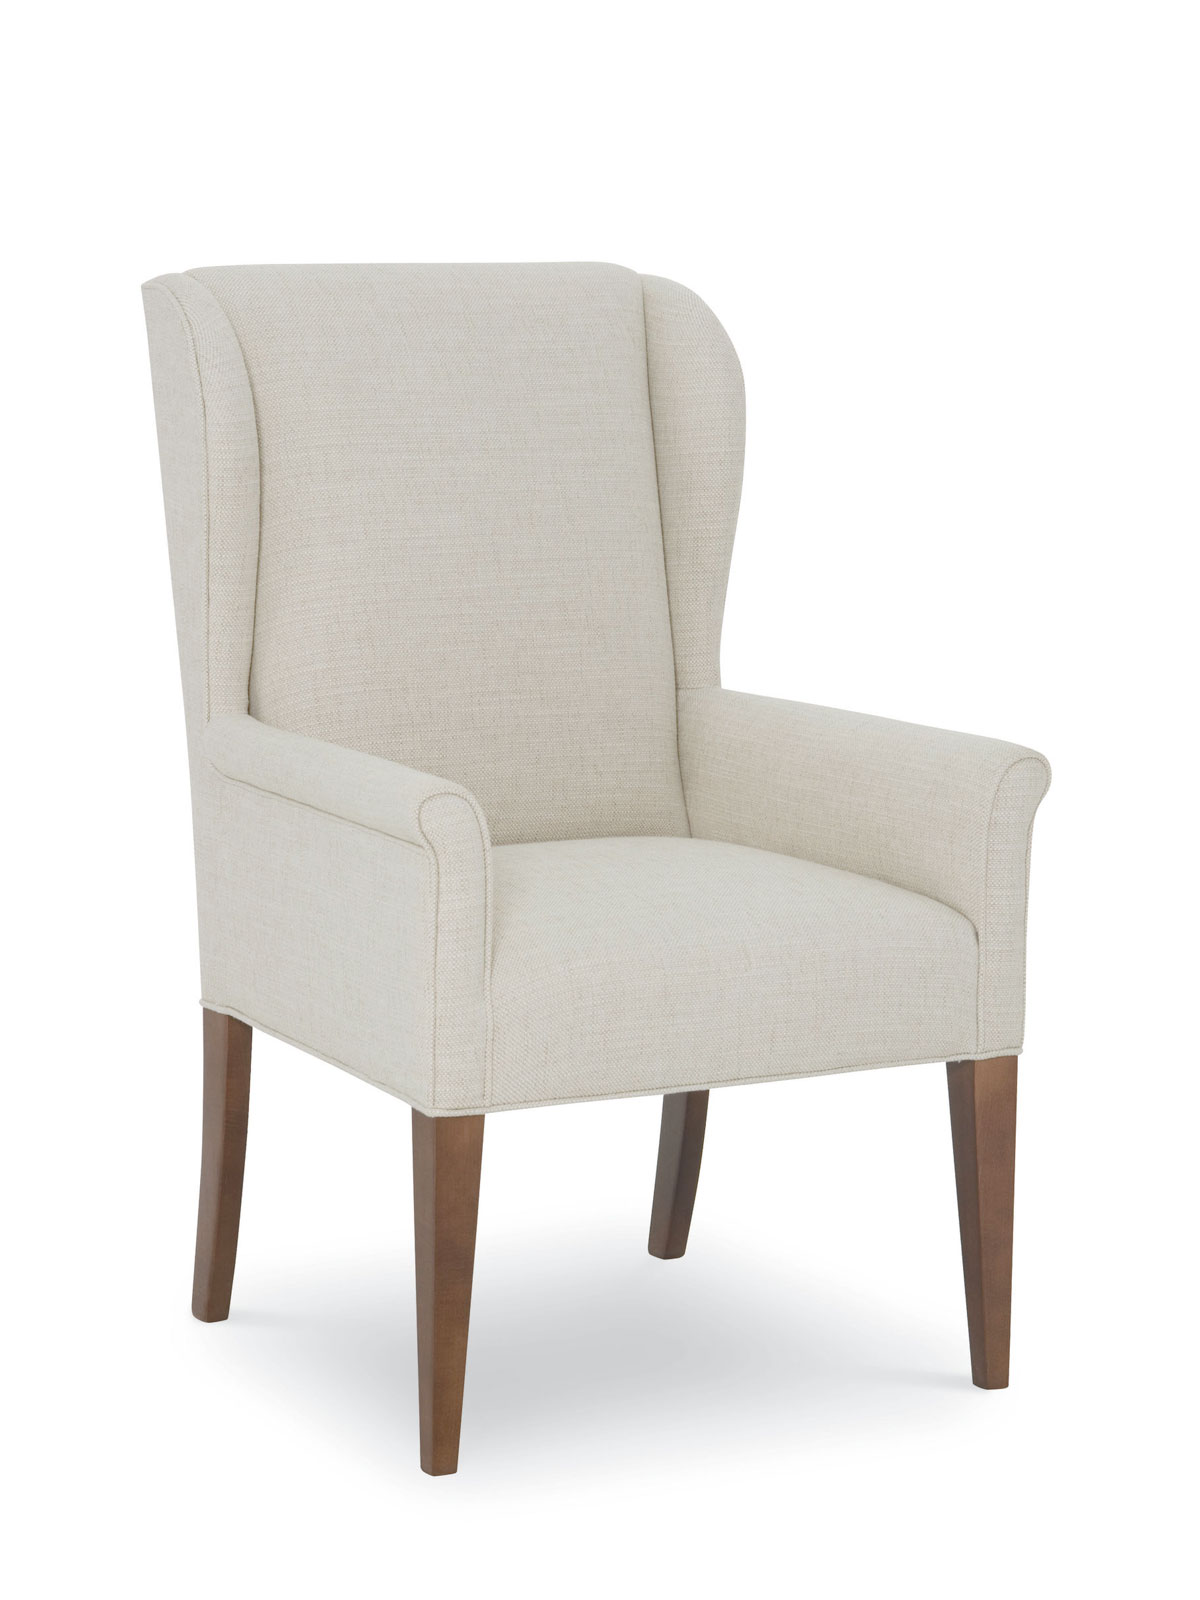 dining chair with arms